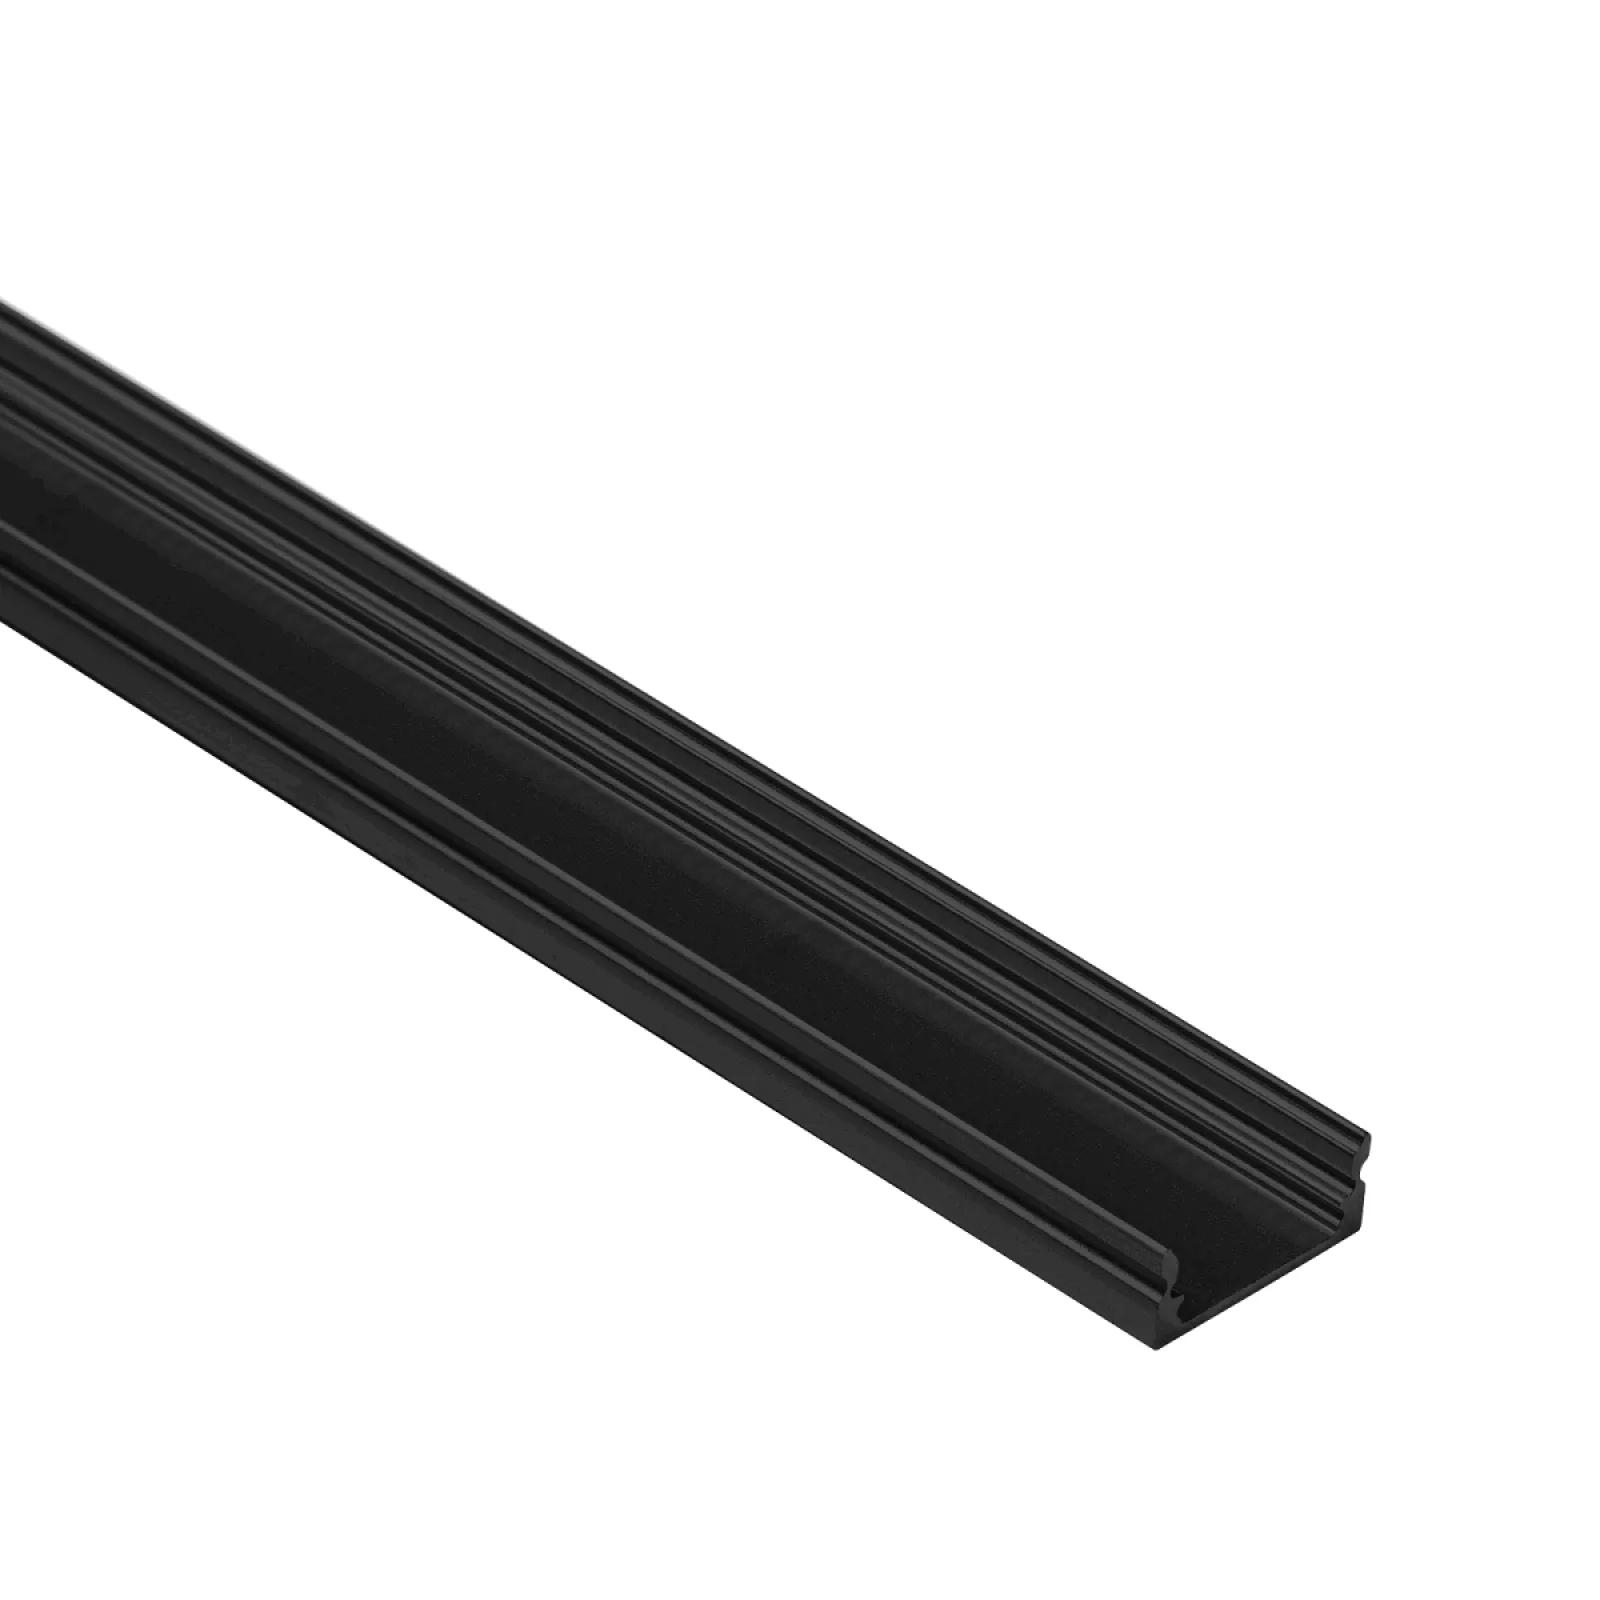 Profile with low edge | Black - 2000x8.2x17.3mm